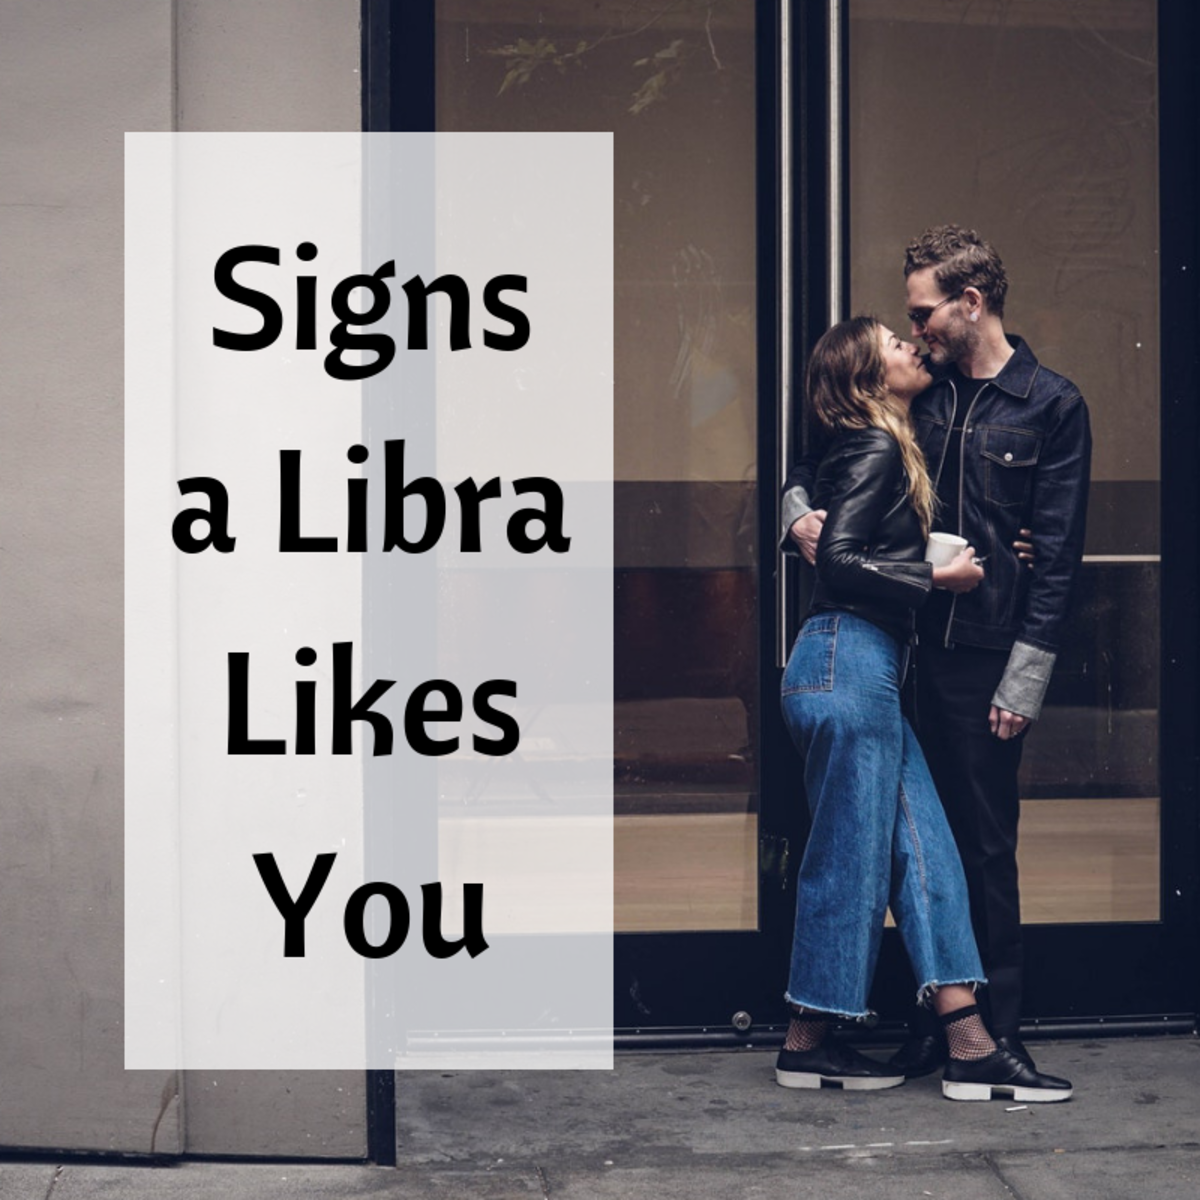 Signs a Libra Likes You.